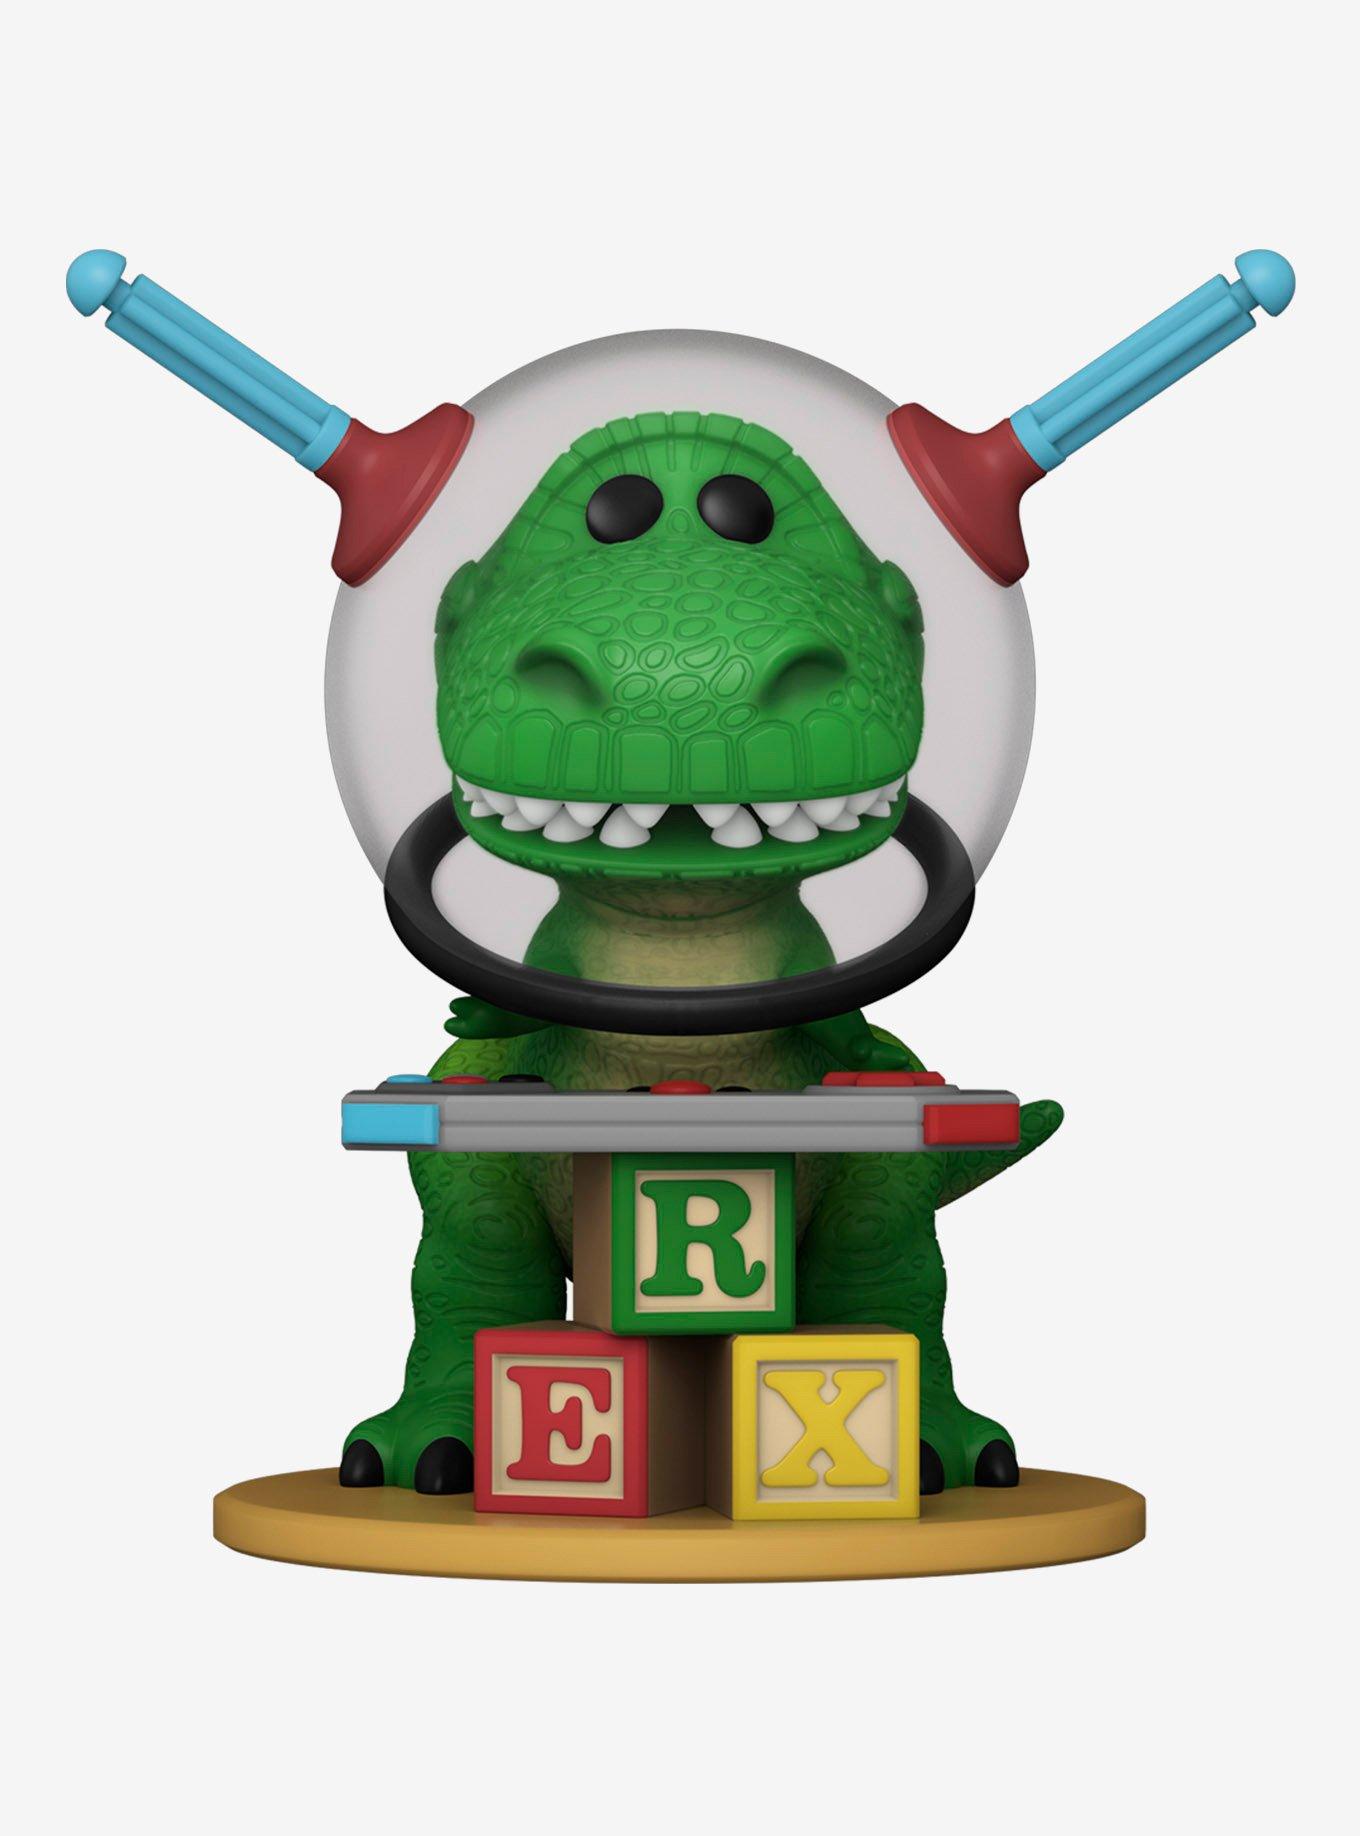 3D Printed Disney Pixar TOY STORY 2 Sign for your Funko Pops and  collectibles